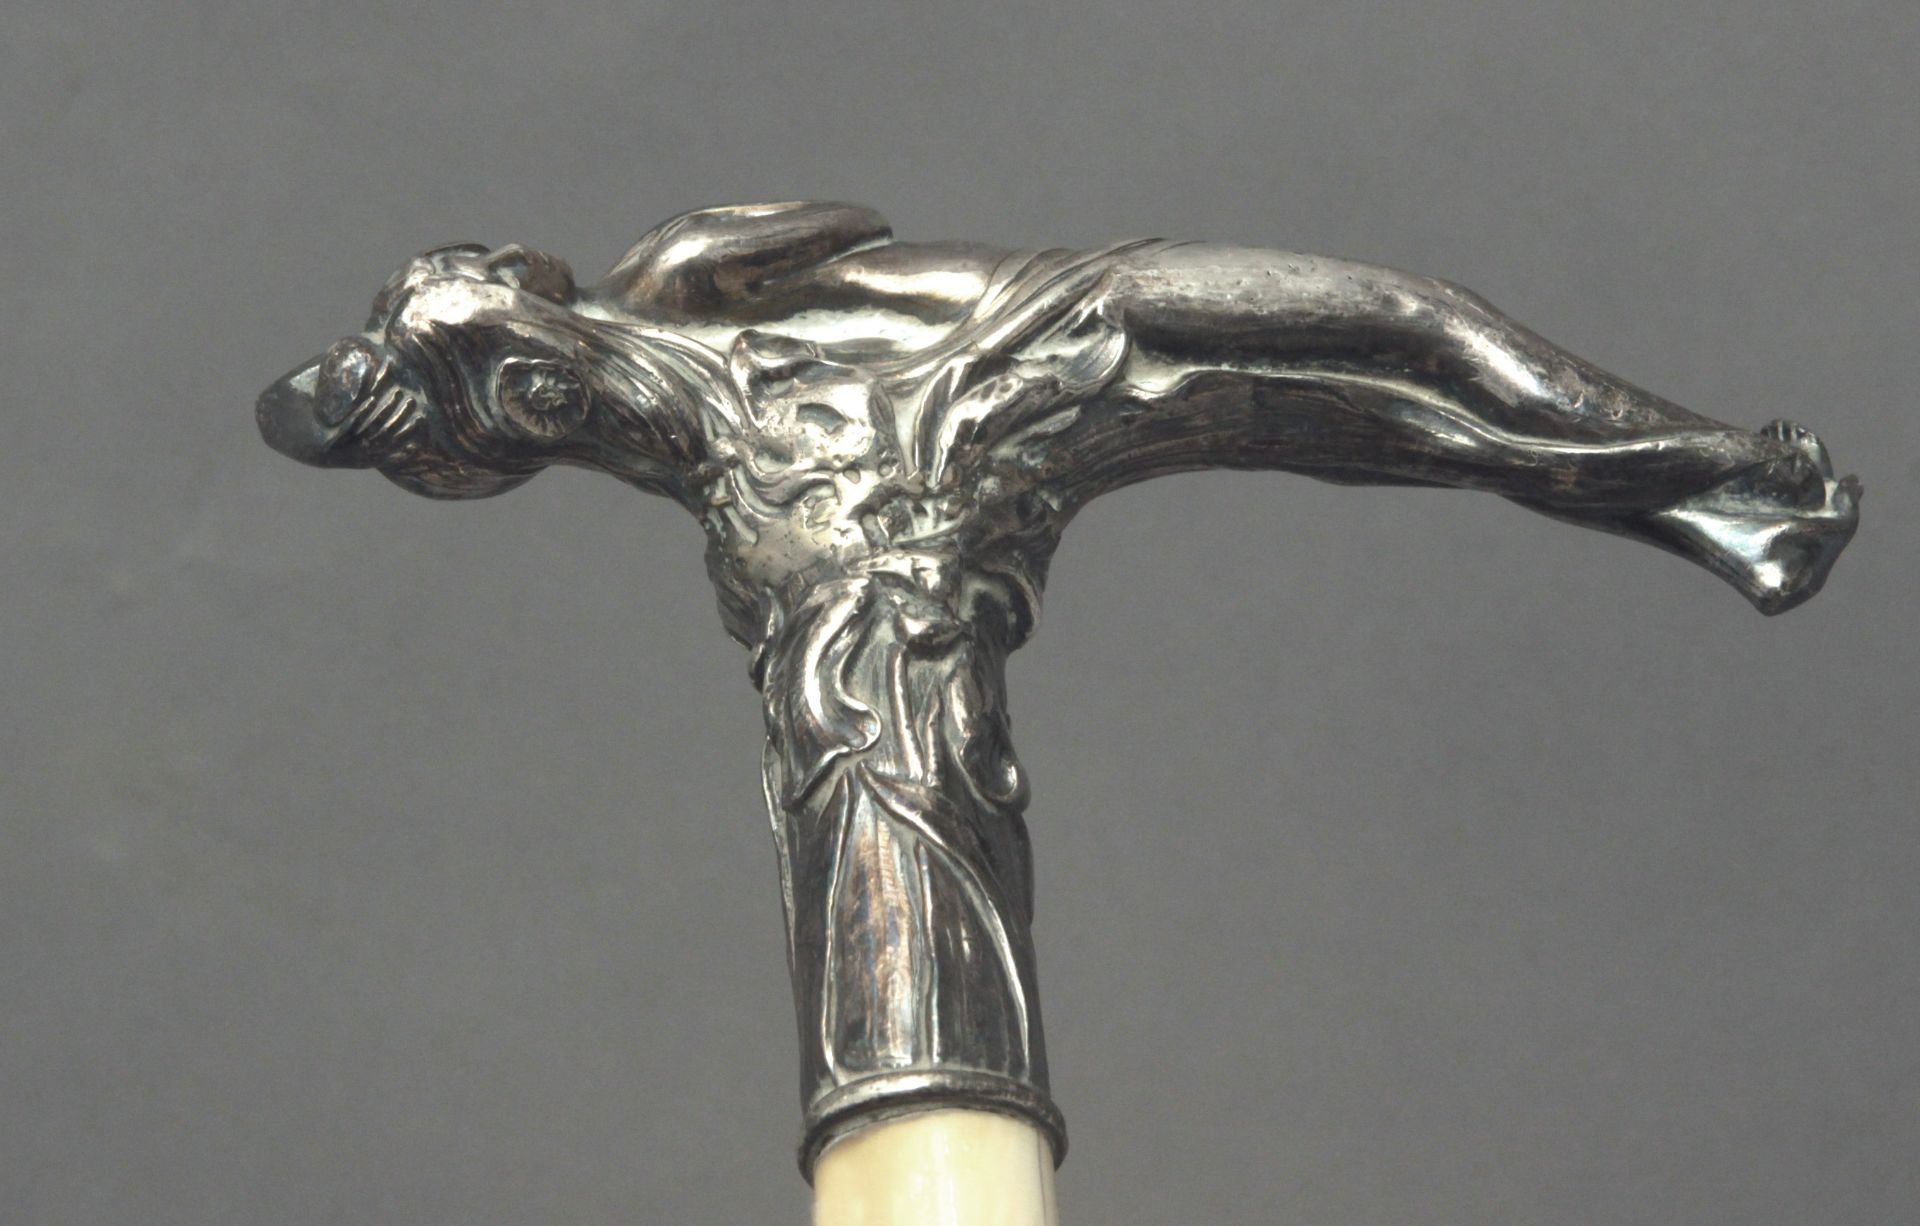 A 19th century silver handled dress cane, probably Germany - Image 12 of 13